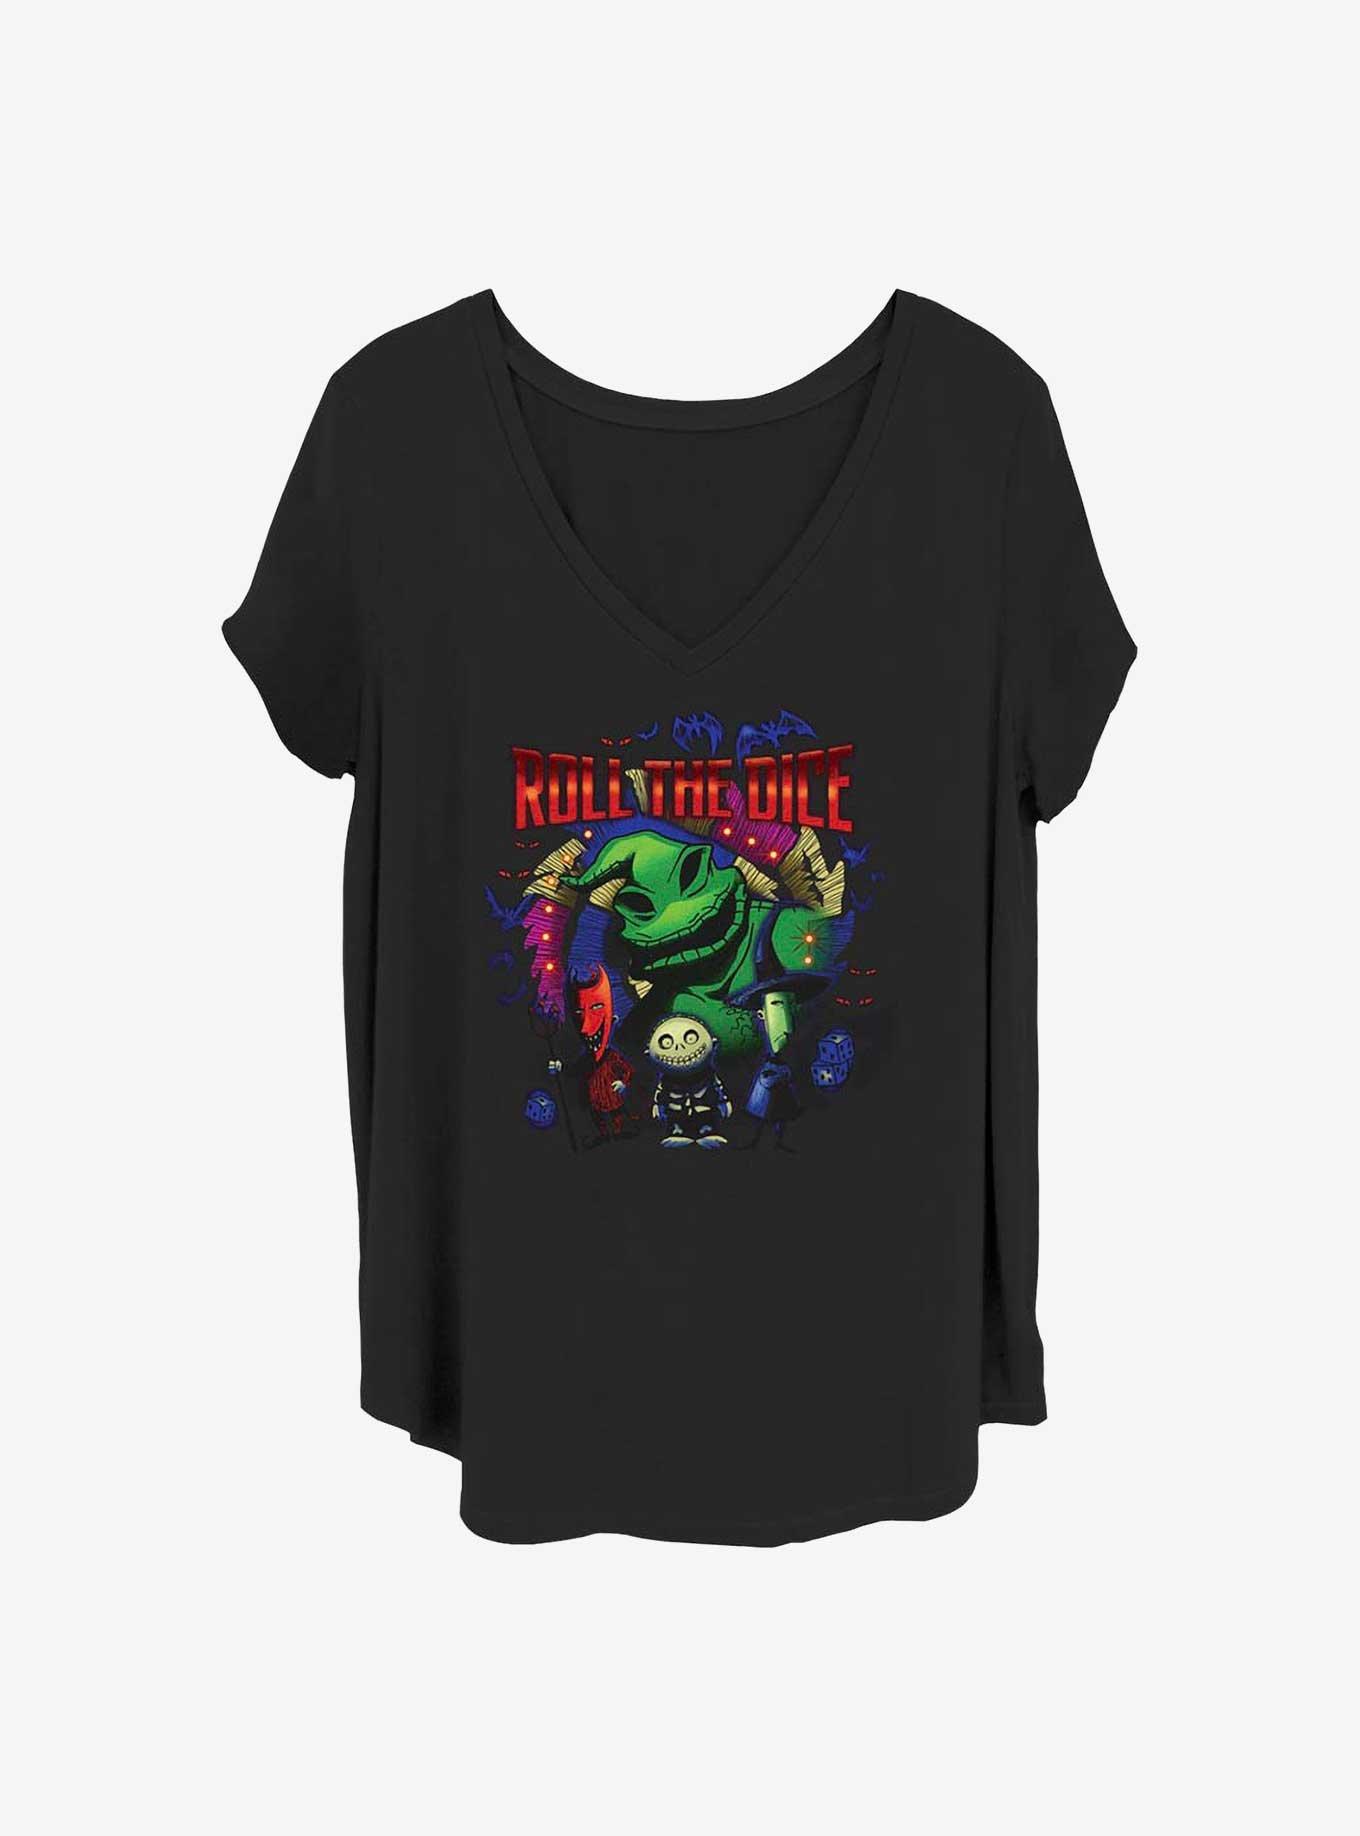 Disney The Nightmare Before Christmas Oogie Boogie Dice Girls T-Shirt Plus Size, , hi-res